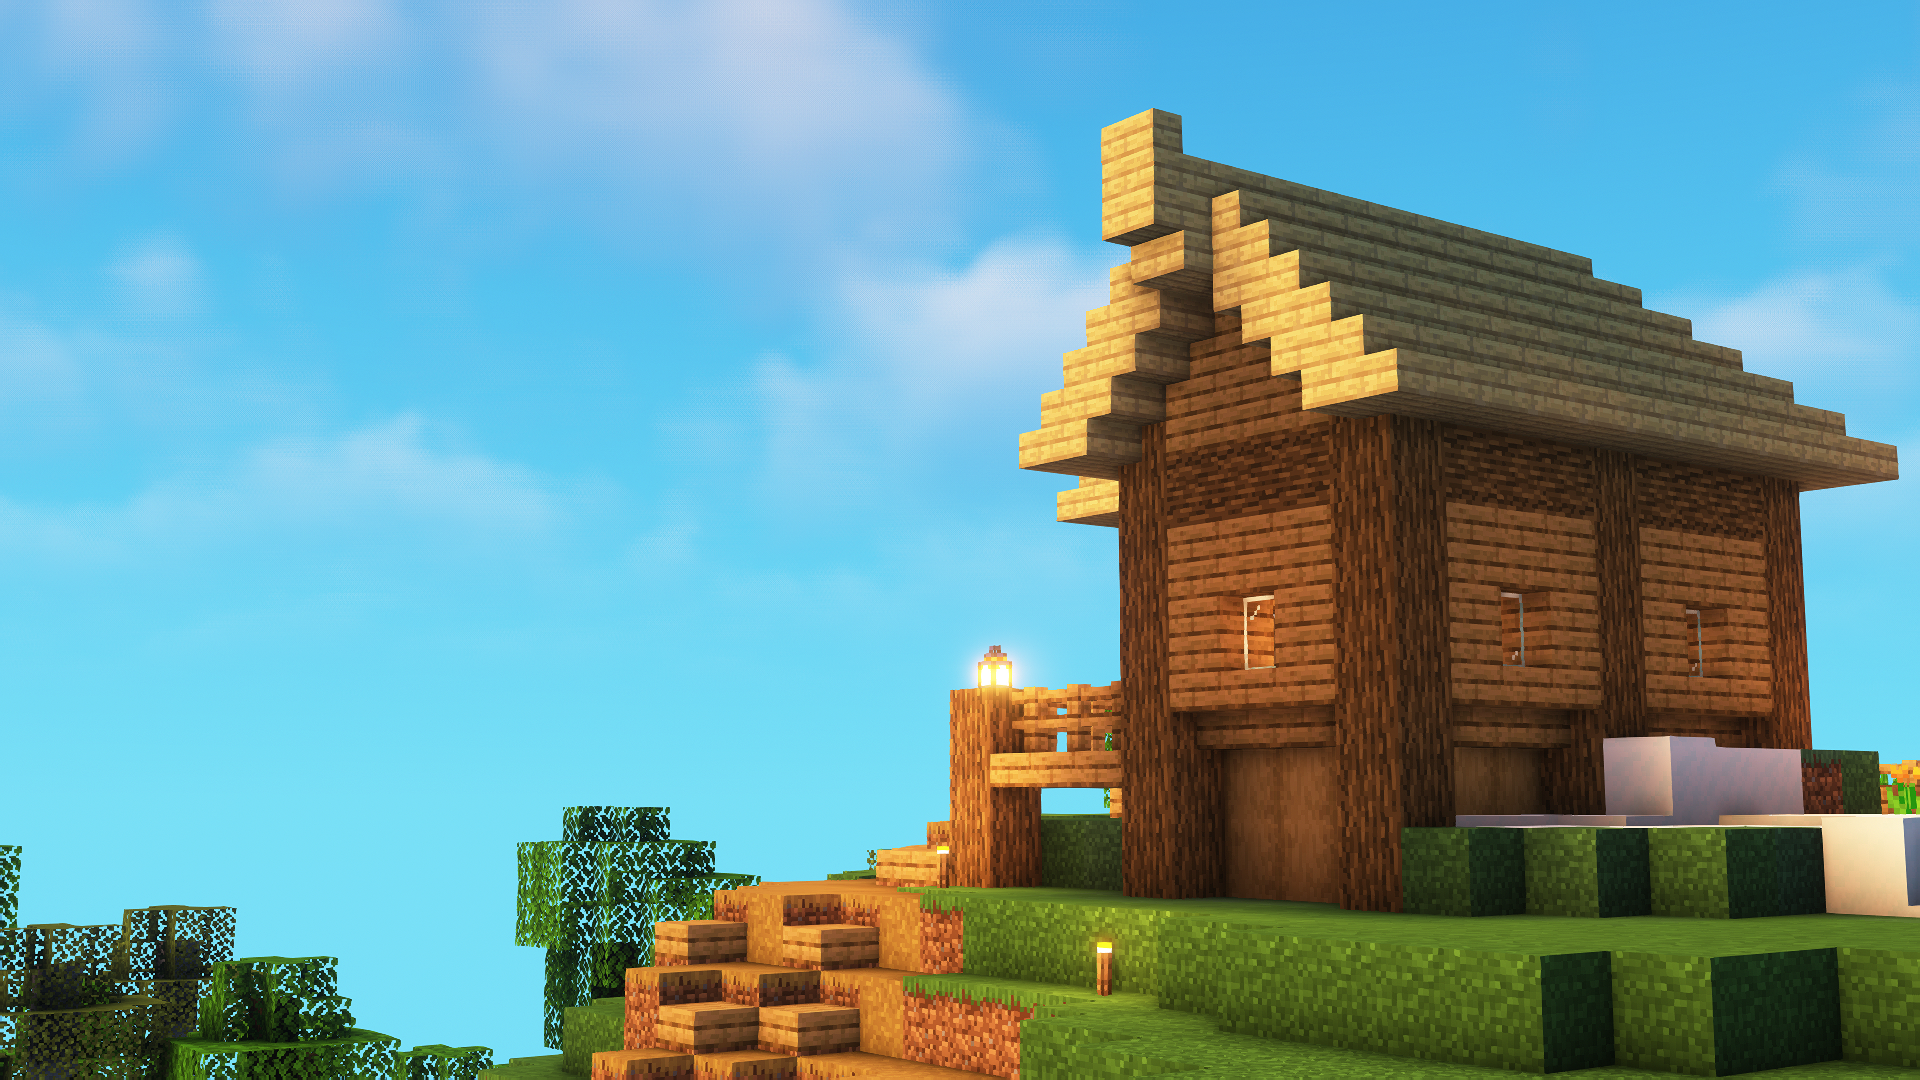 took this nice screenshot of a house i built to use as my wallpaper